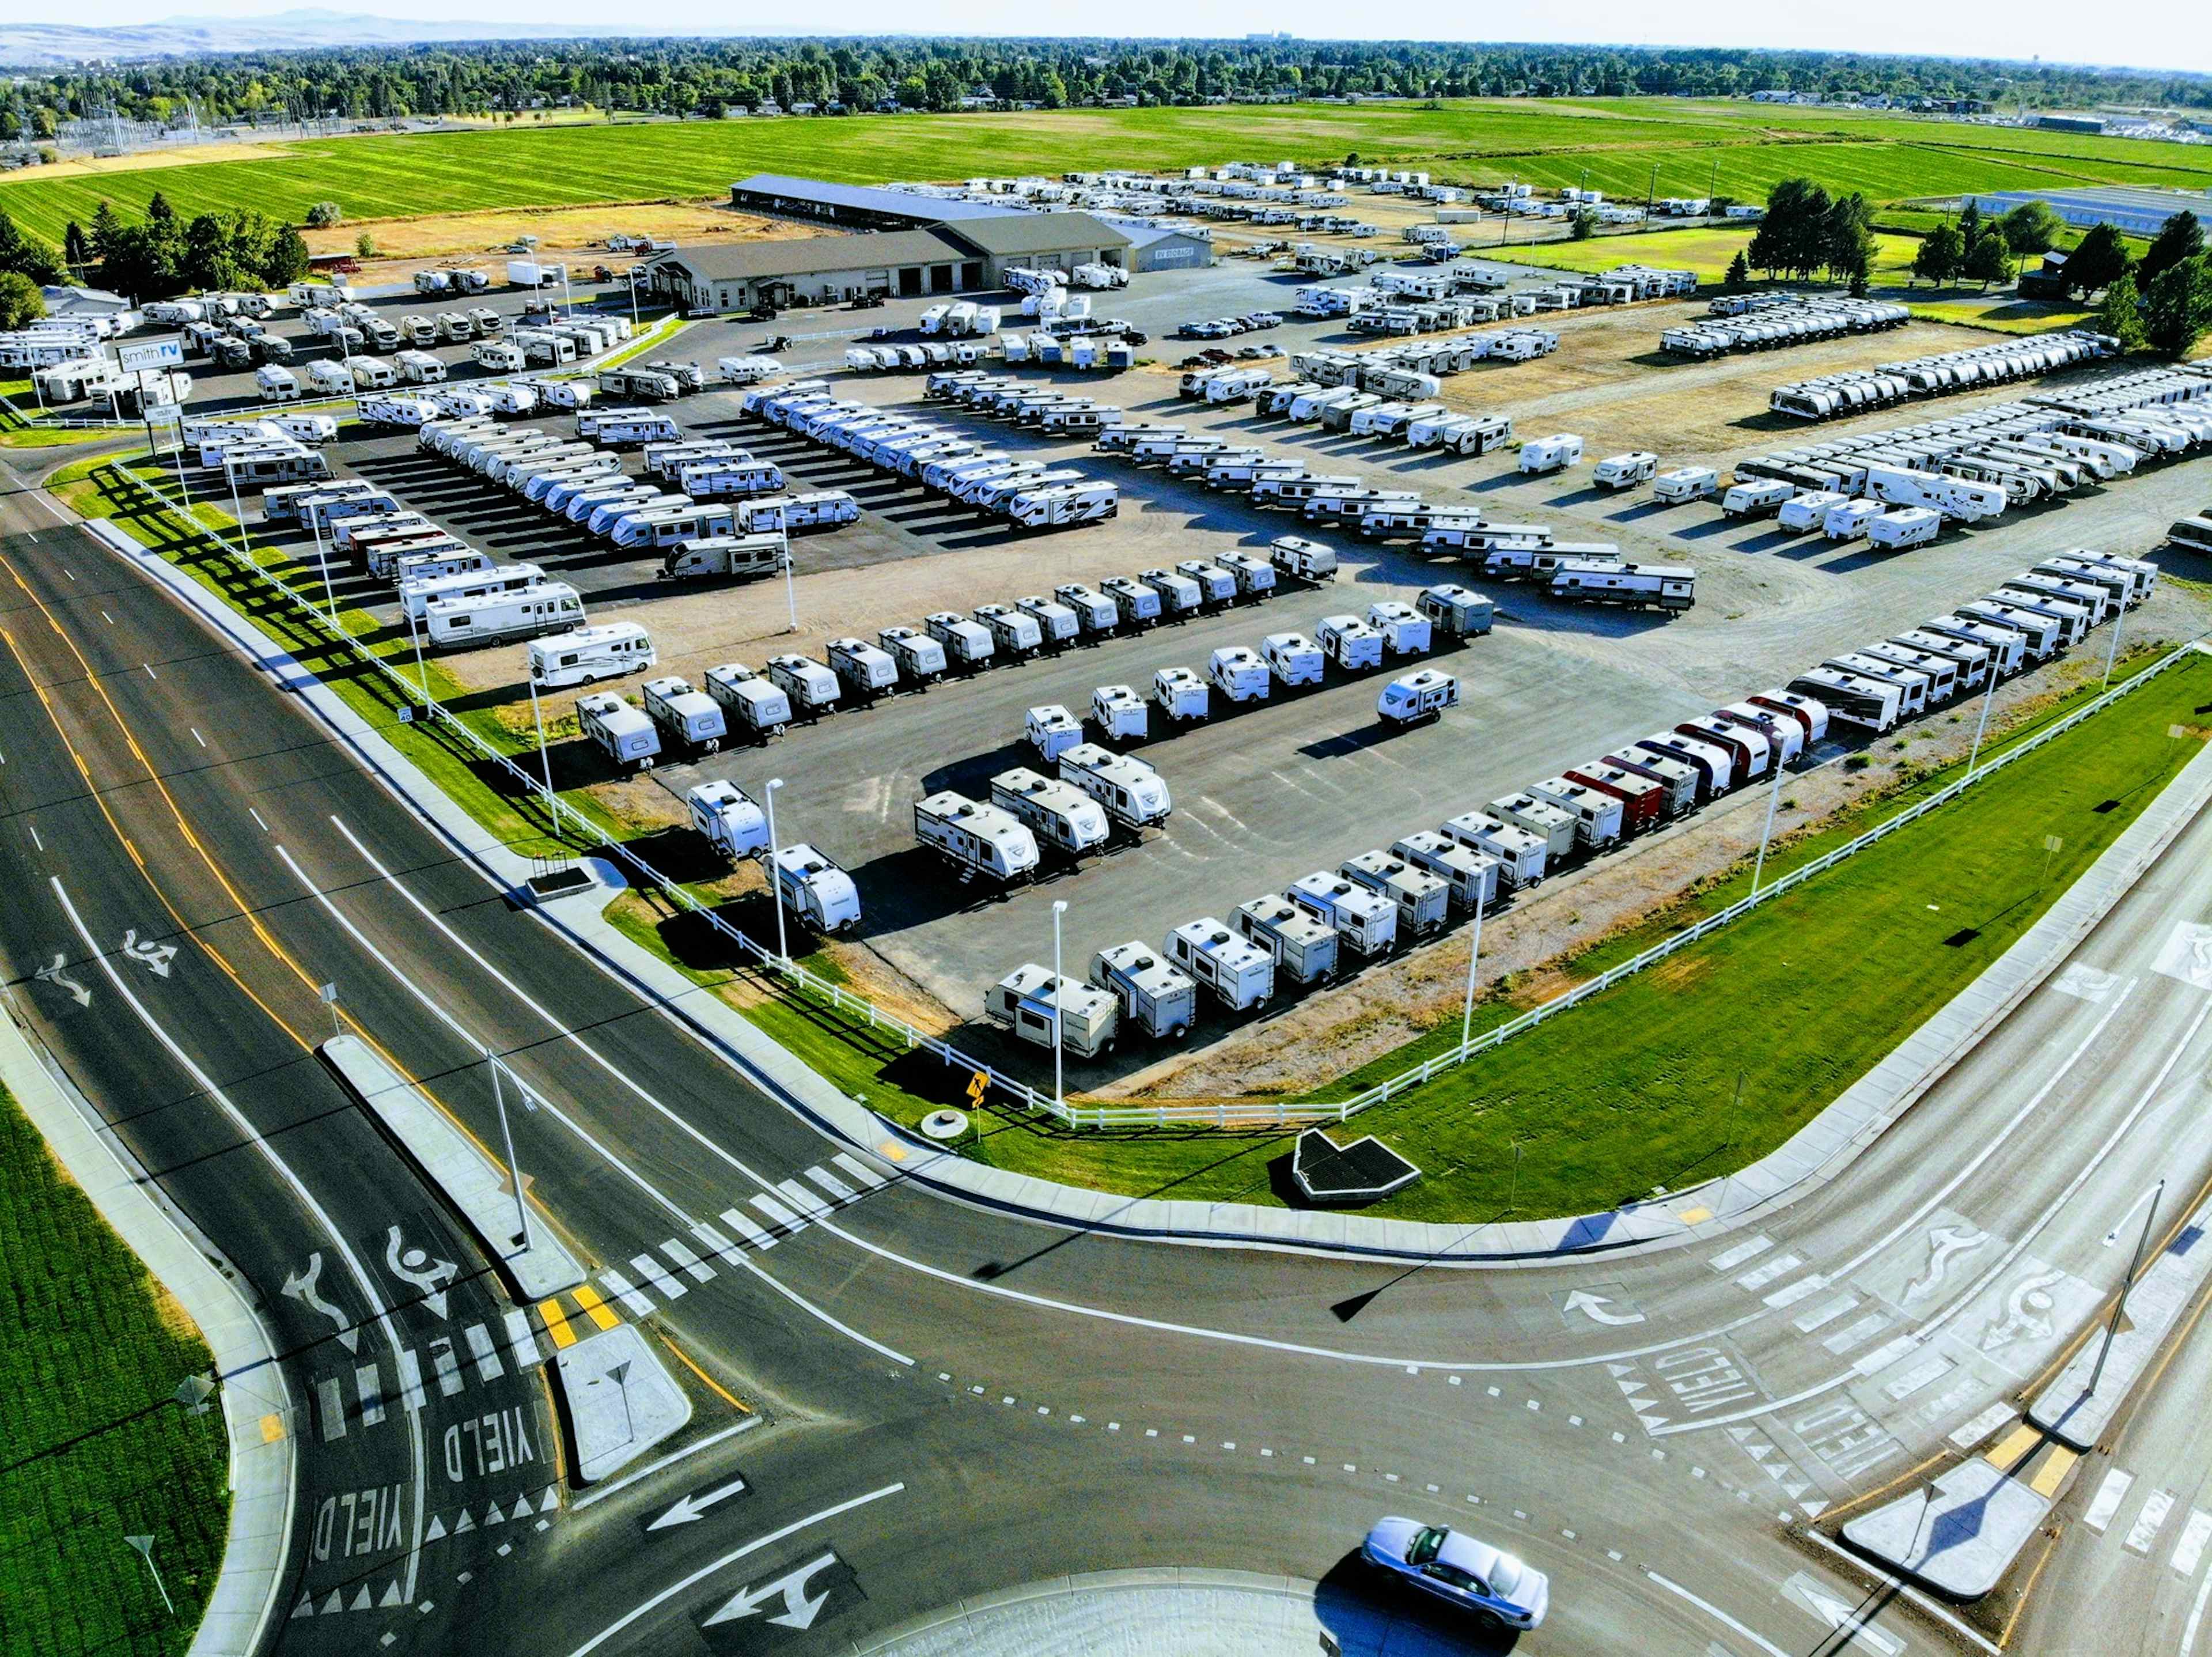 Above view of Smith Rv, offering new and used RV's to the Yellowstone Teton Territory, located in Idaho Falls, Idaho